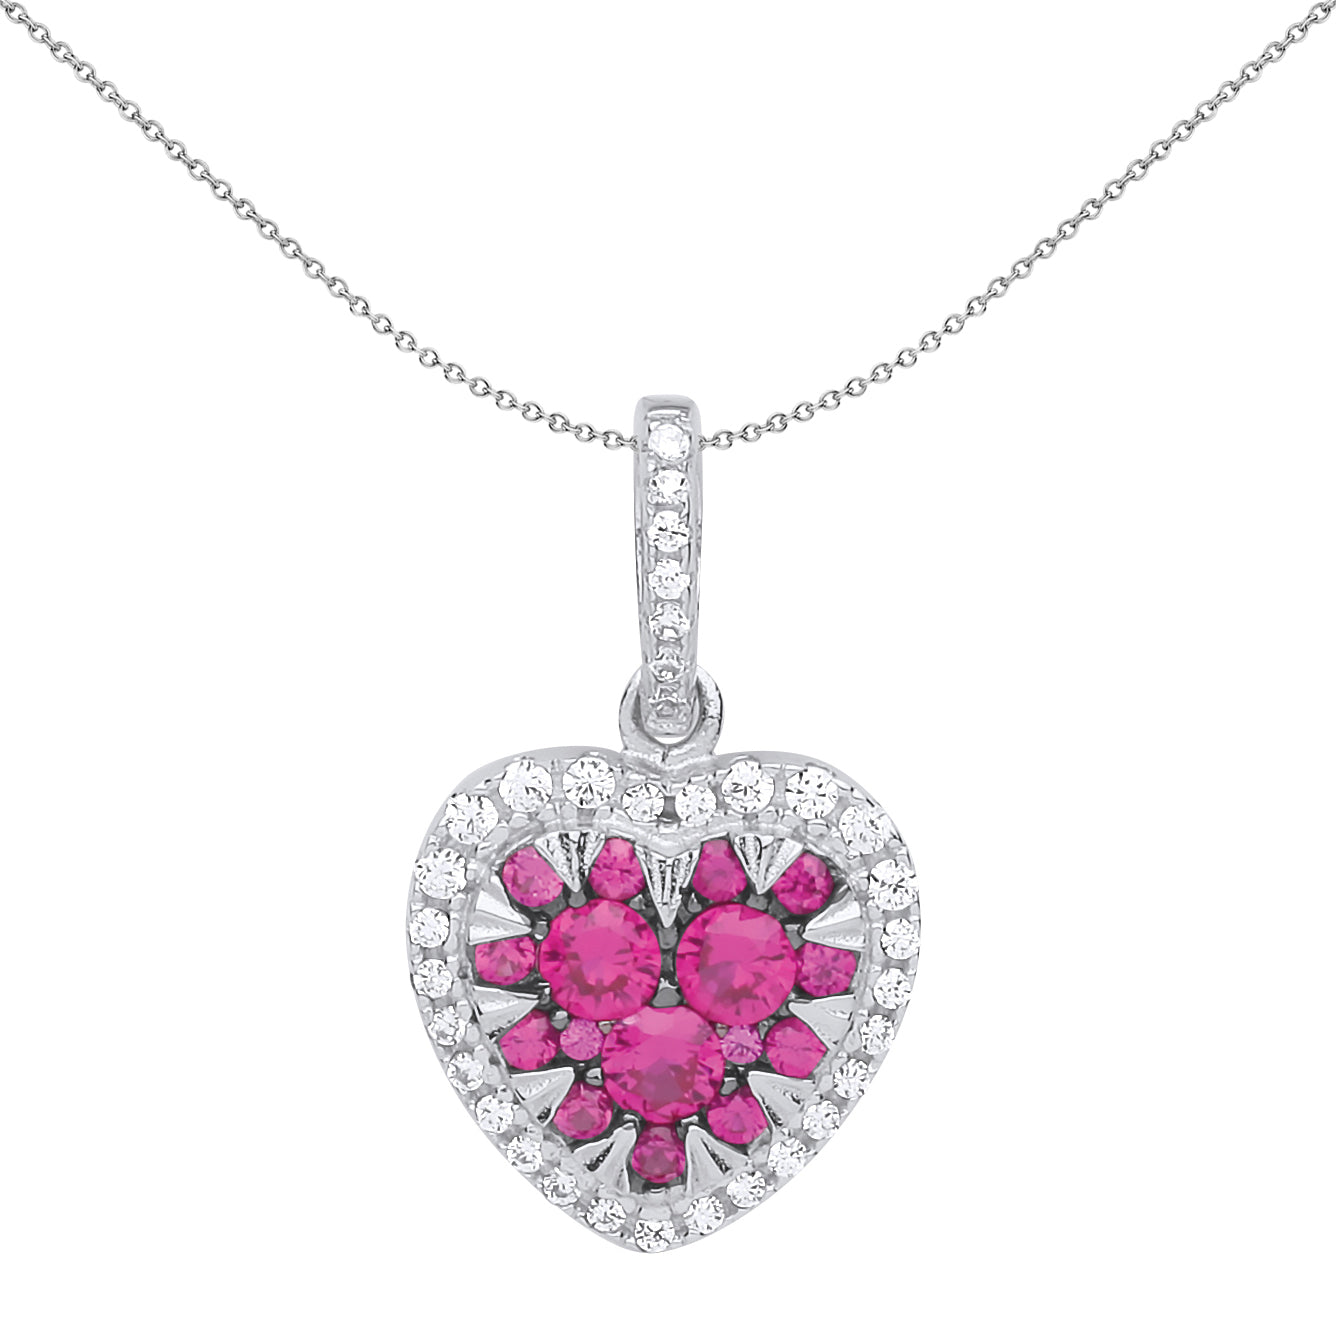 Silver  Hot Pink CZ Love Has Teeth Heart Charm Necklace 18 inch - GVP521